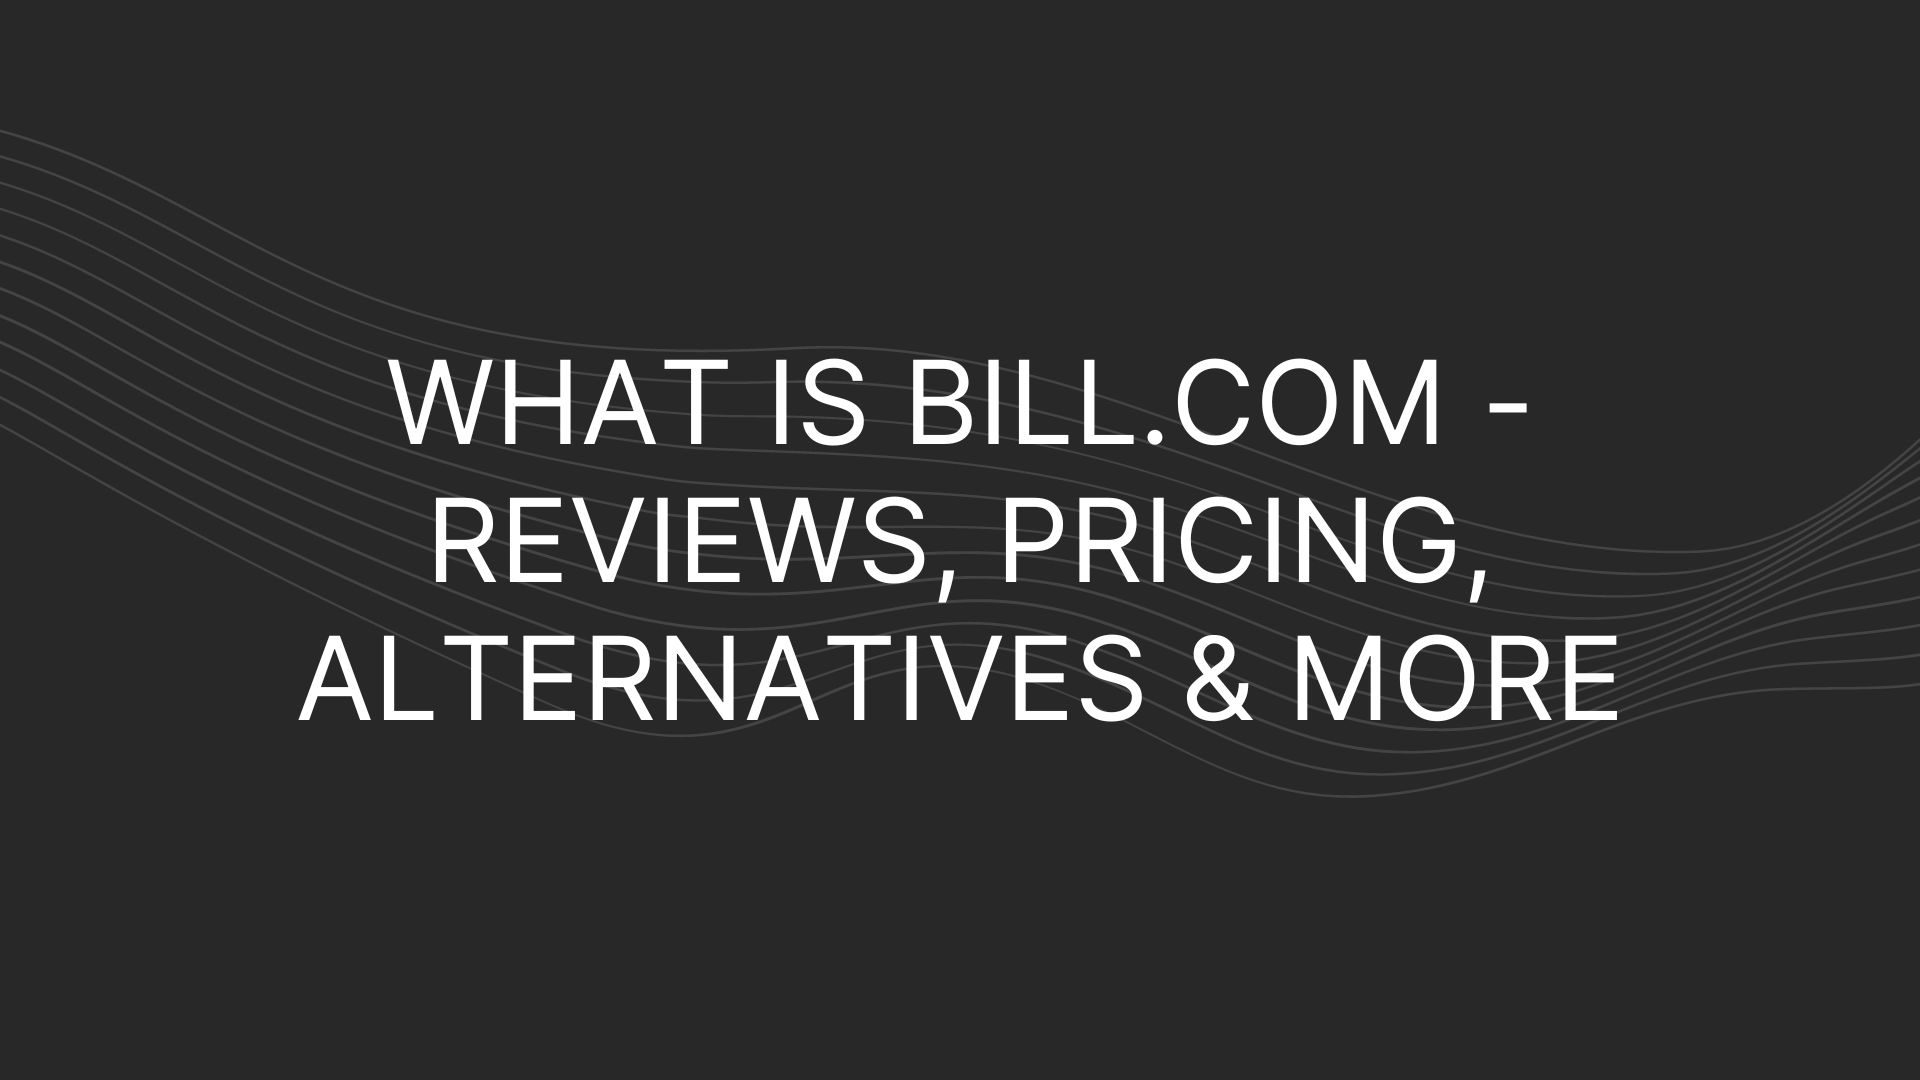 What is Bill.com